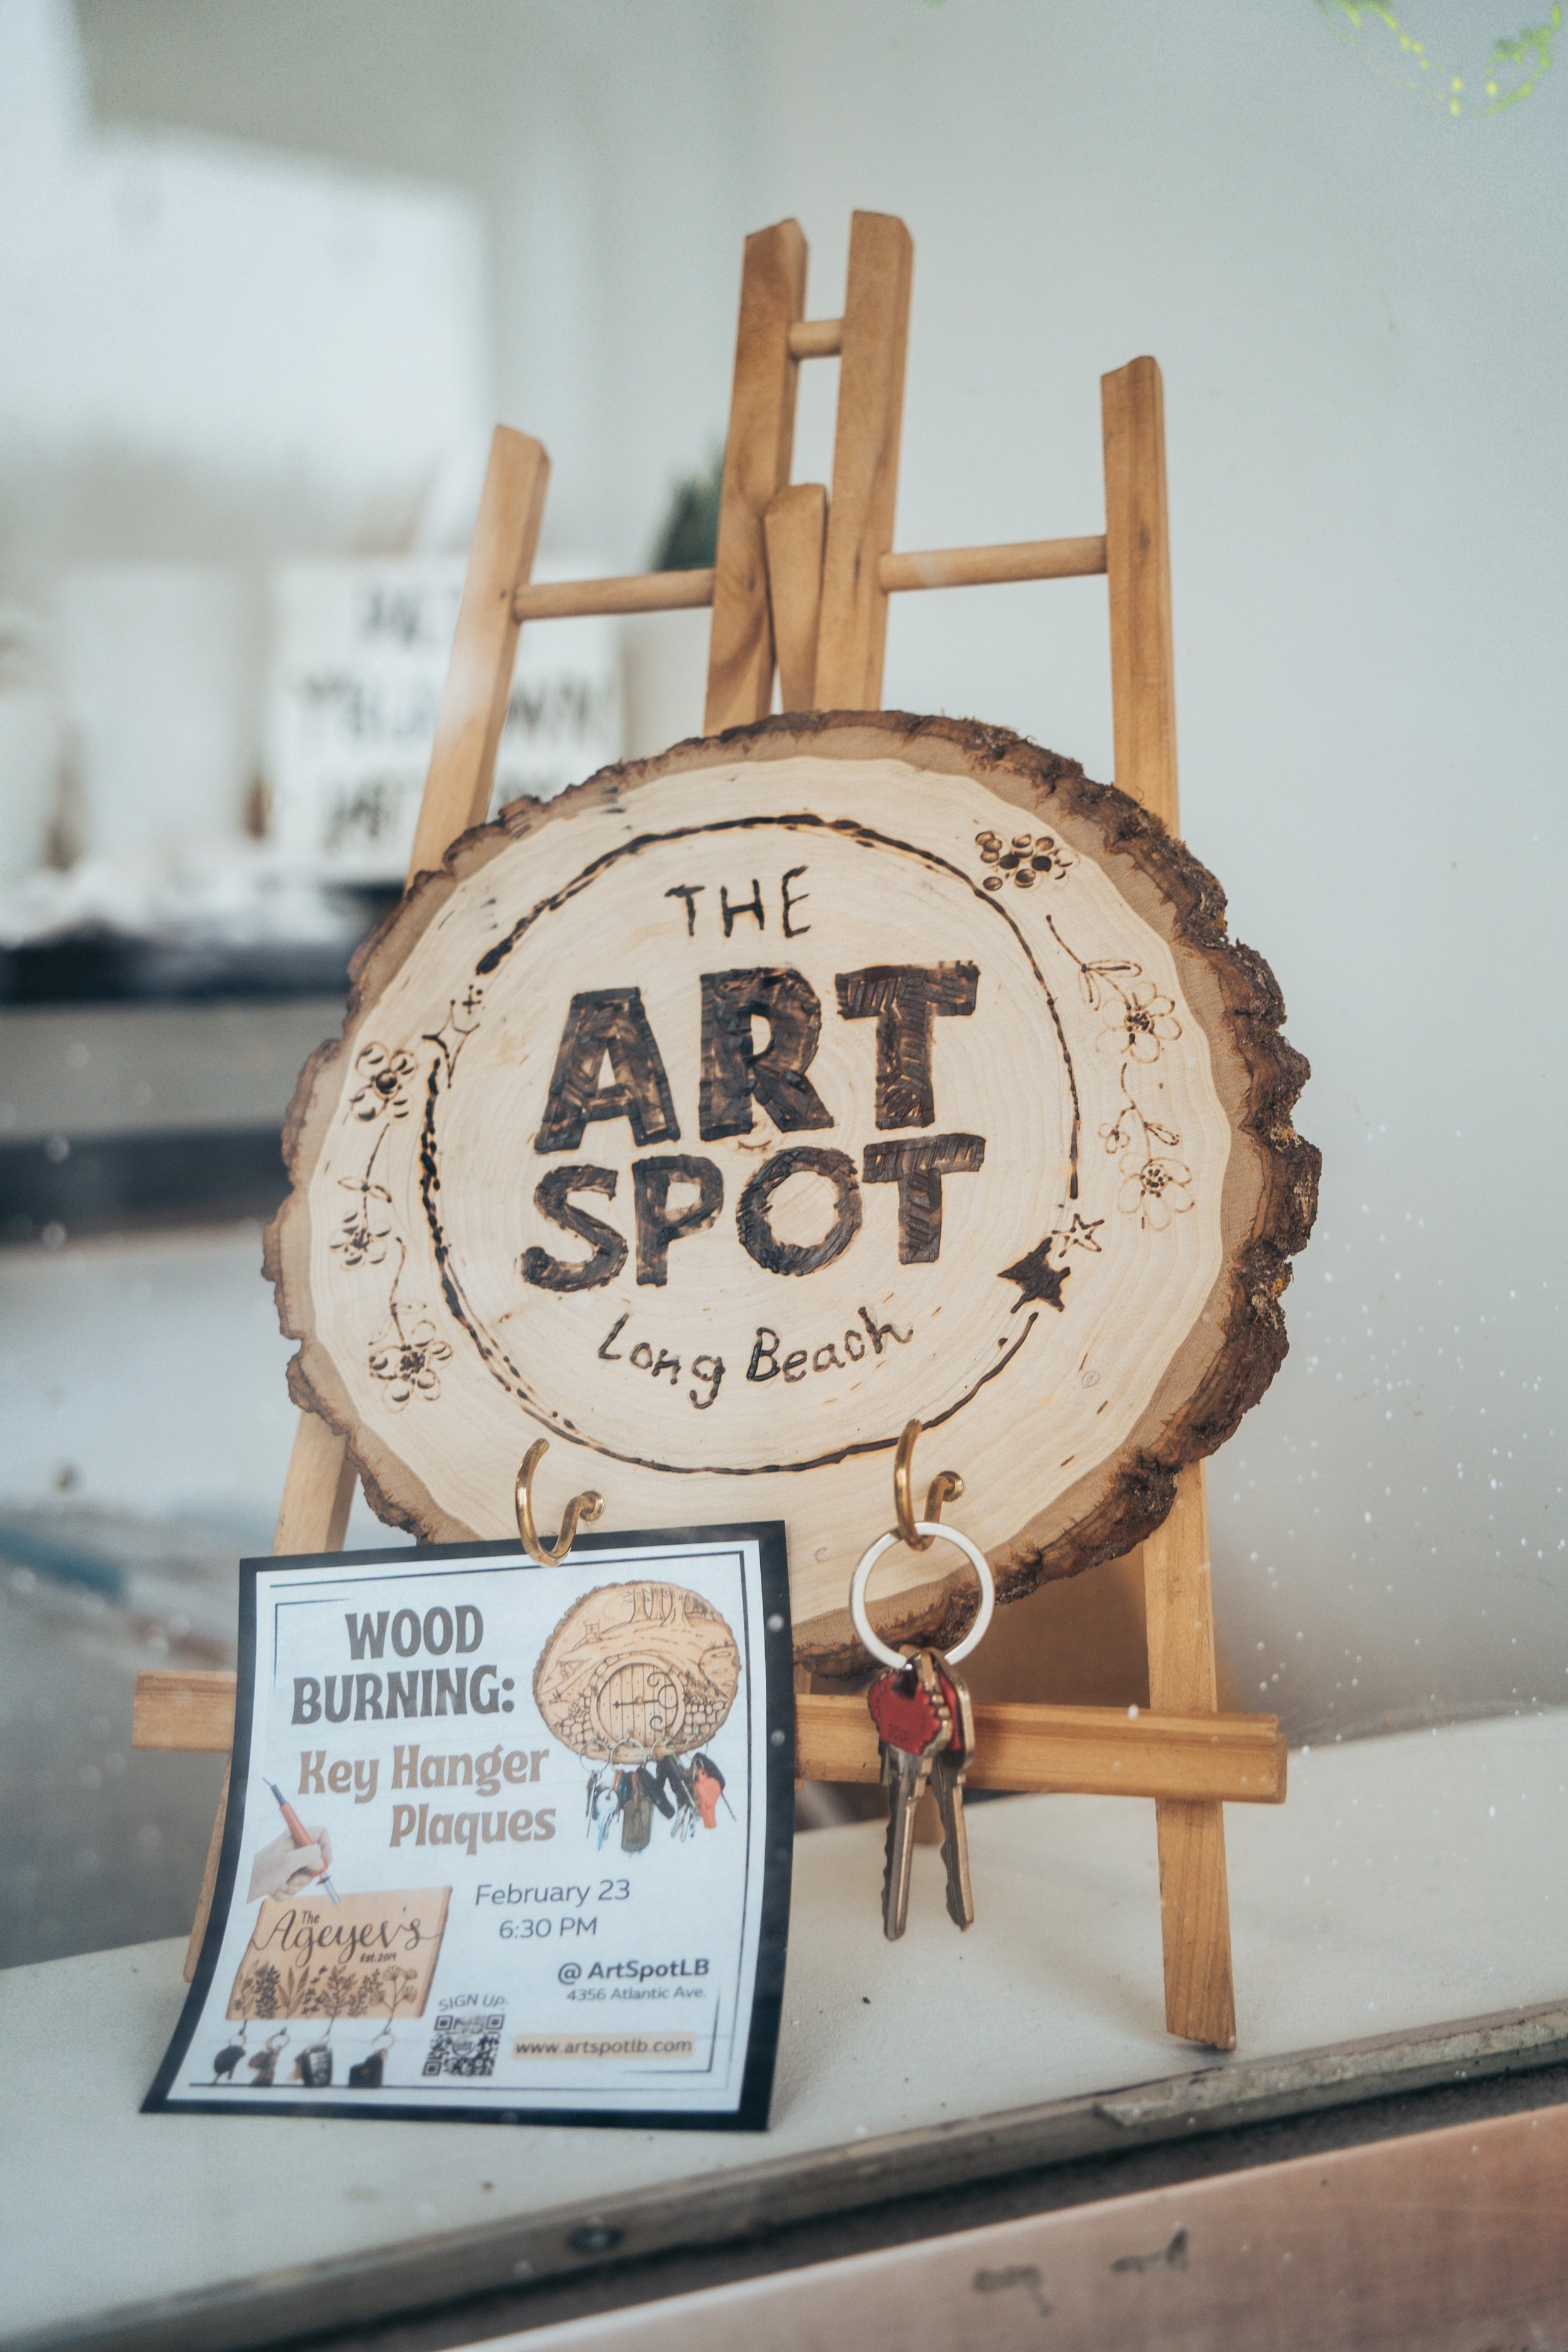  The Art Spot shares the joys of art through fun and accessible creative programming 